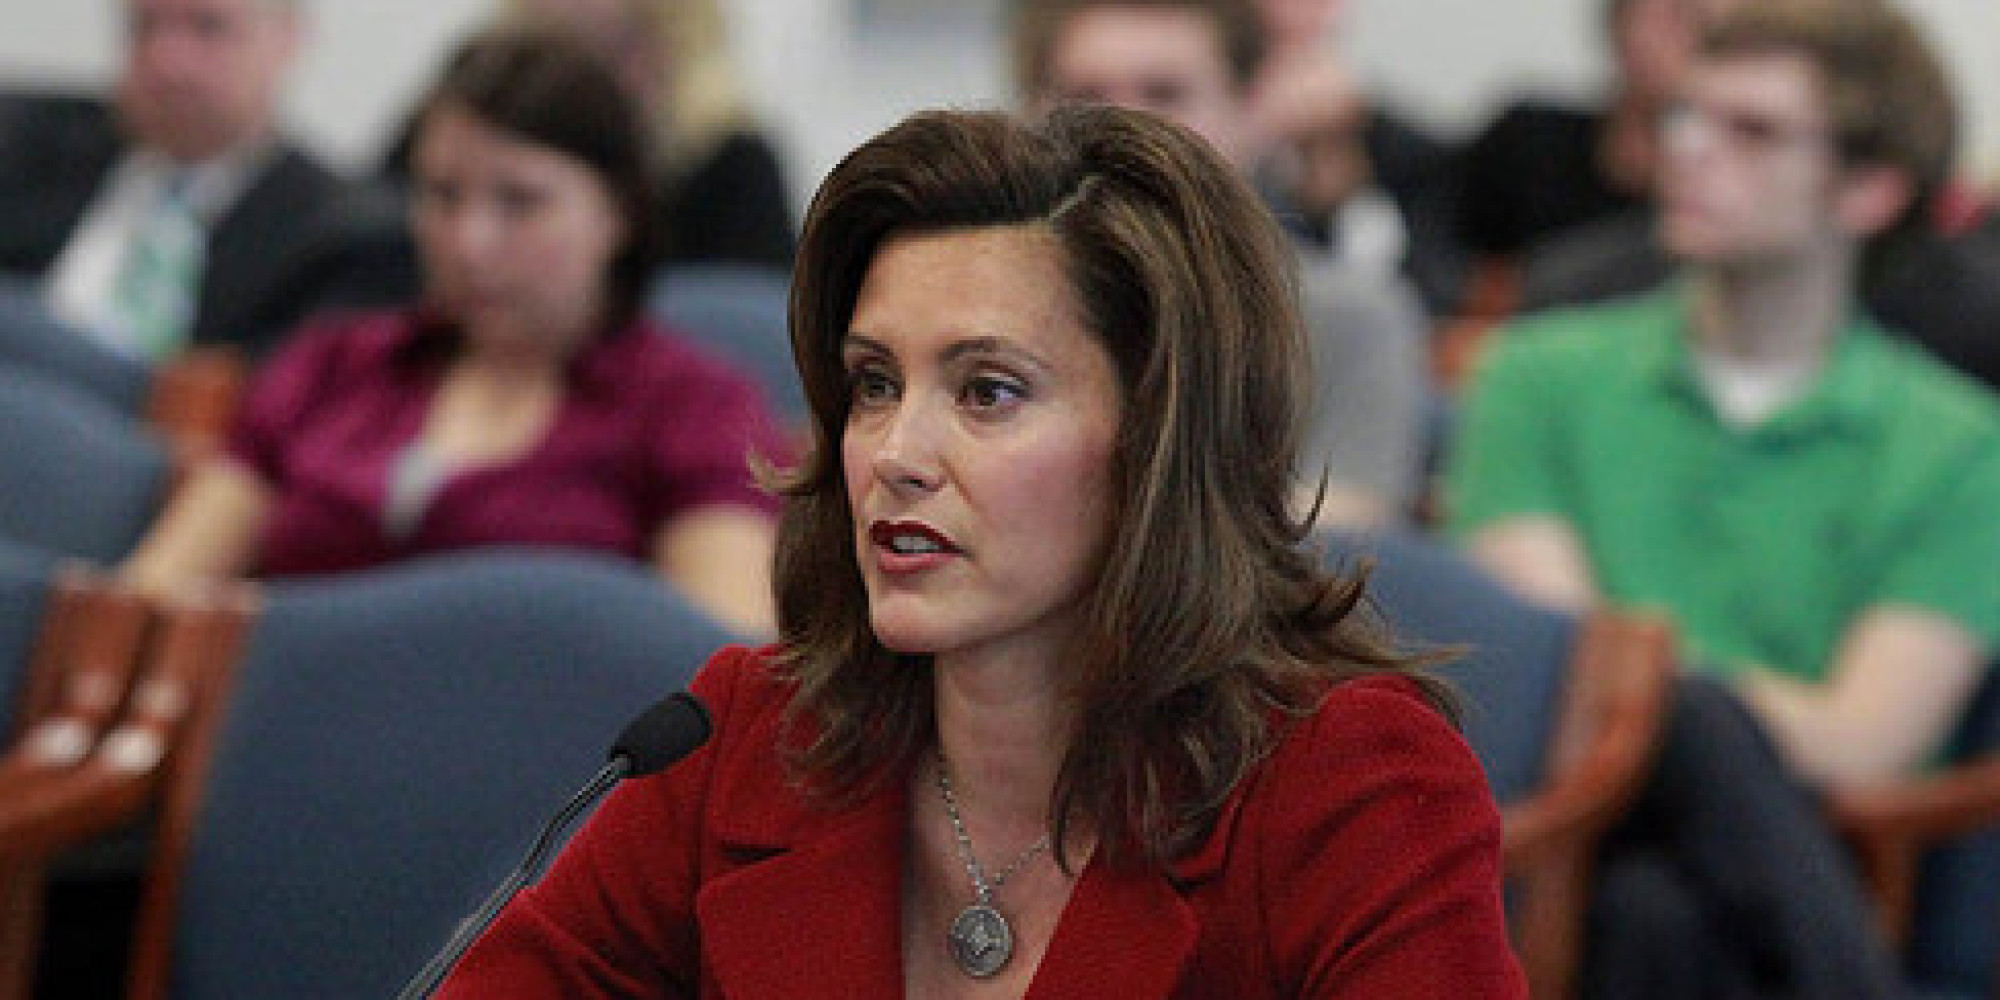 Lawmaker Bravely Reveals She Was Victim Of Rape In Emotional 'Abortion Insurance ...